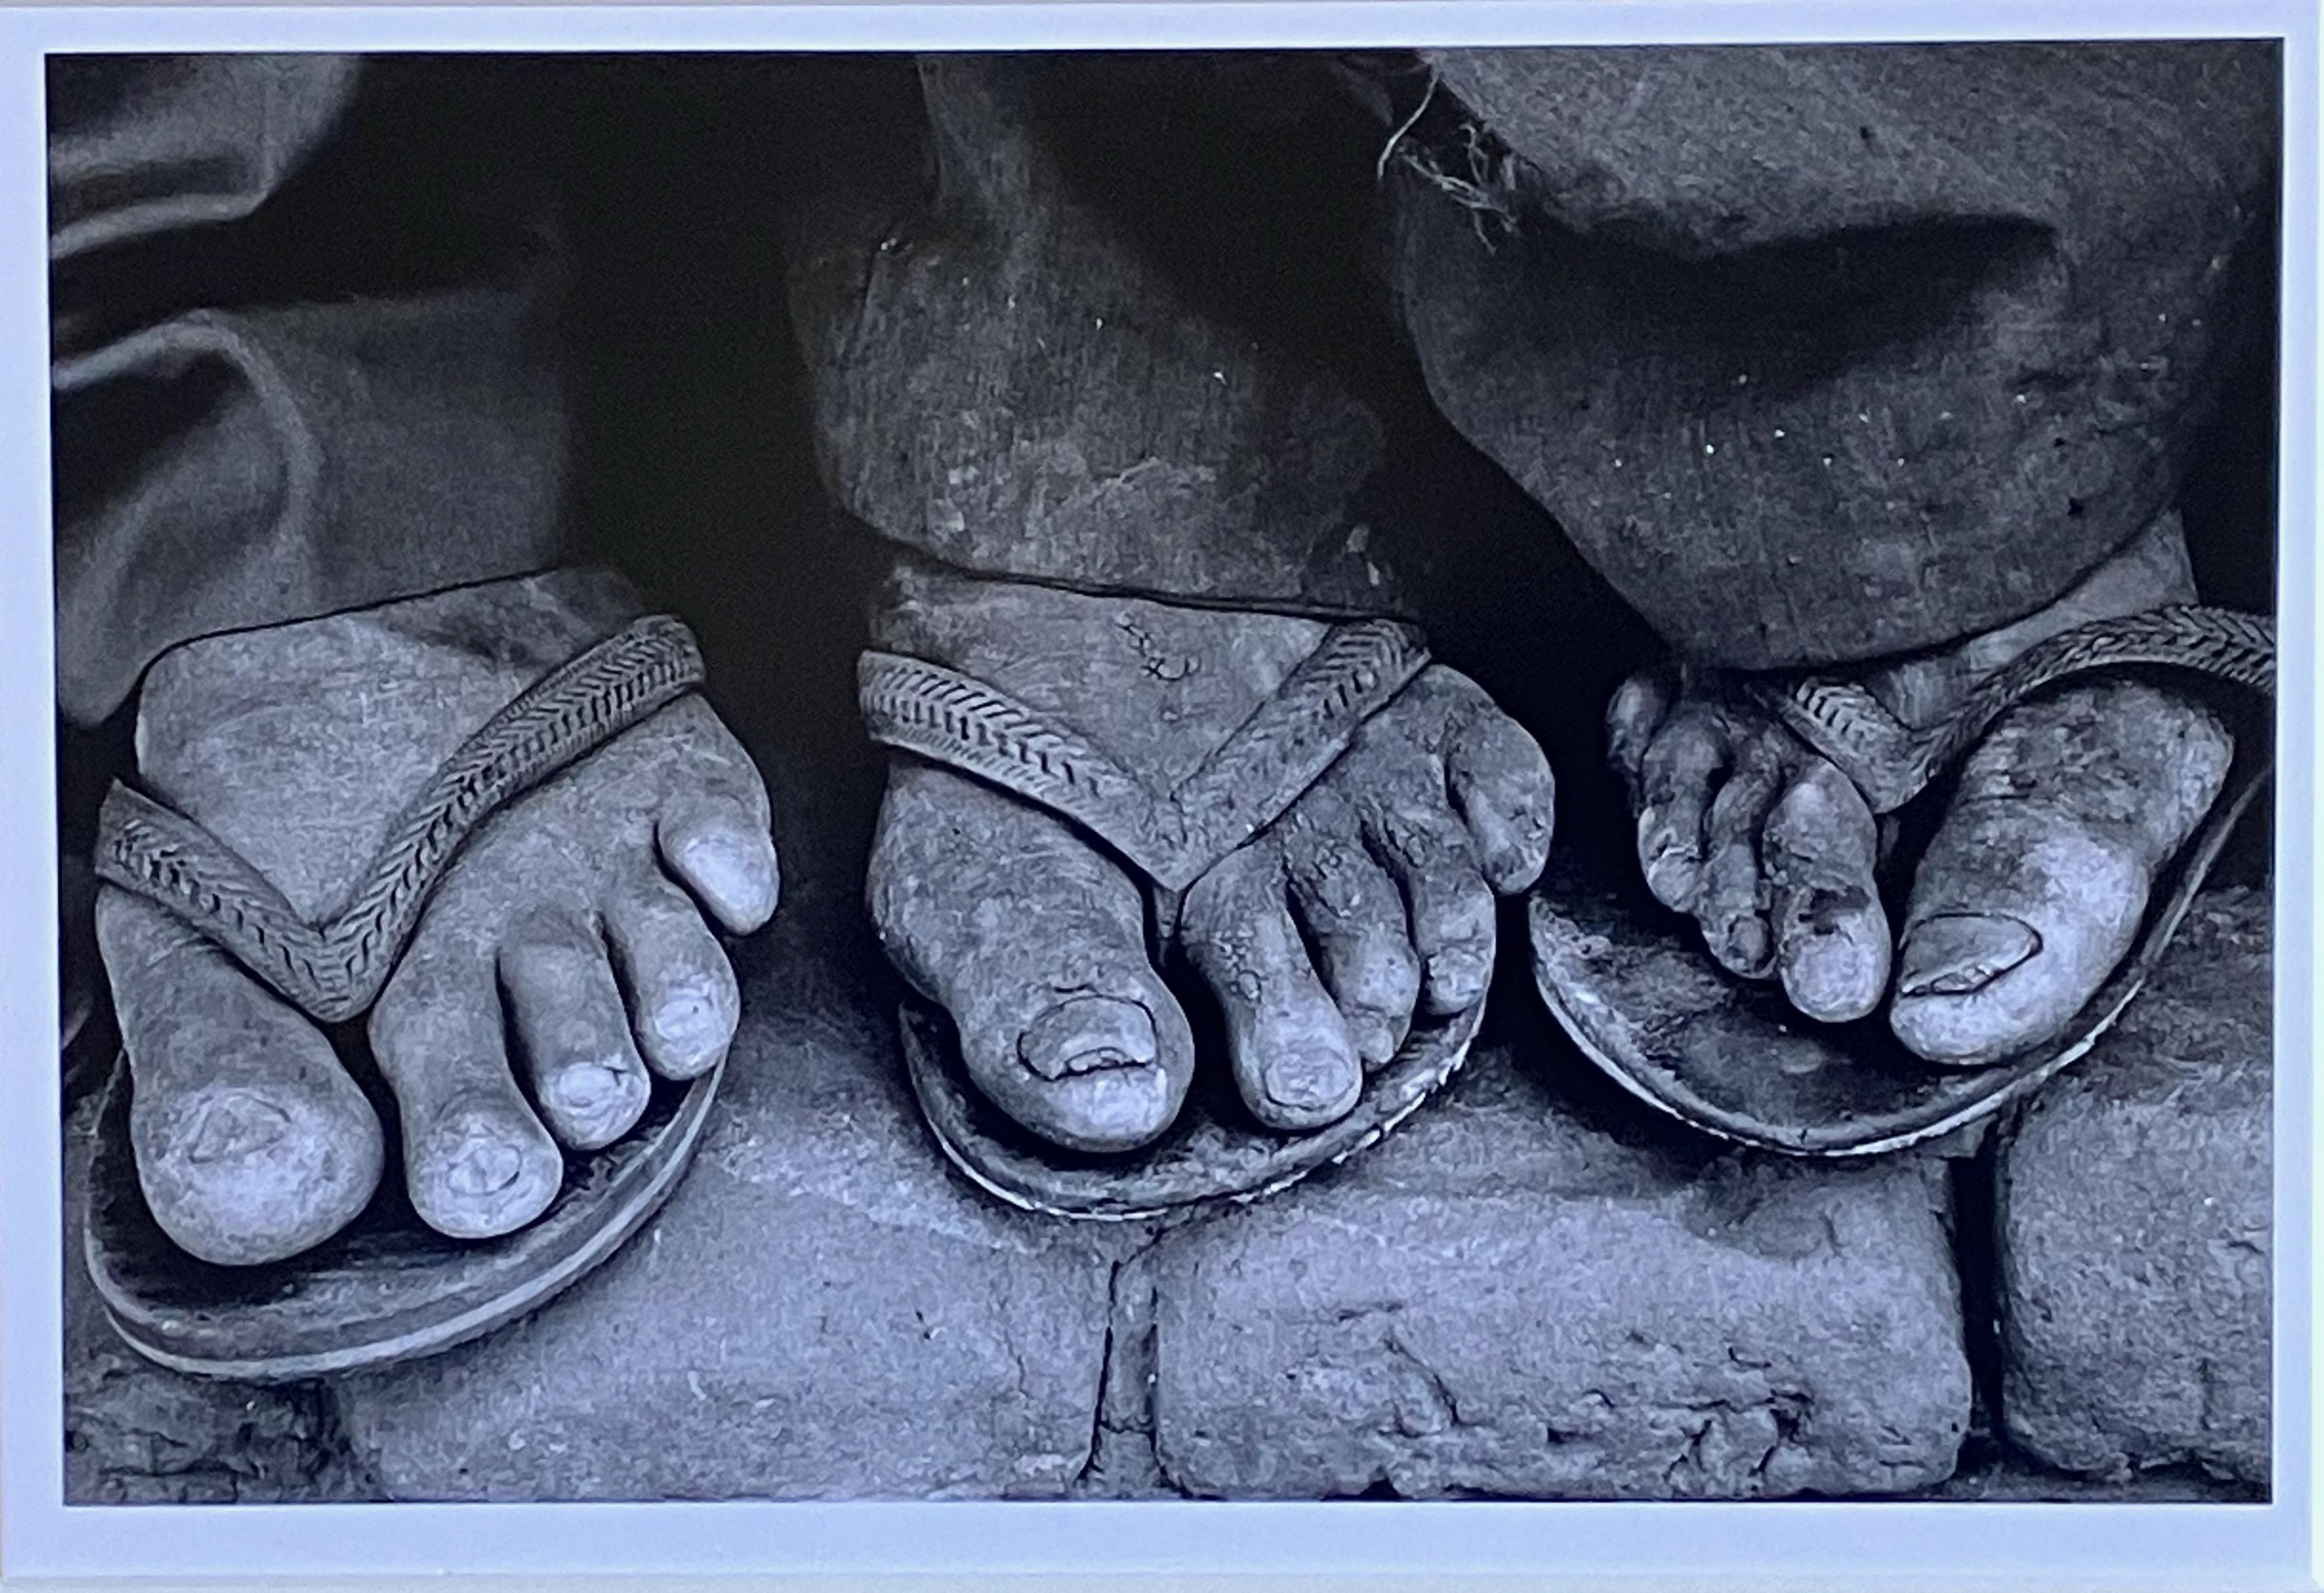 Artist: Sebastiao Salgado – Brazilian (1944-)
Title: Feet, Brazil
Year: 1983
Medium: Gelatin silver print
Sight size: 6 7/8 x 10.5 inches
Signature: Signed and dated on reverse. Blindstamp, lower margin.
Framed size: 12 7/8 x 16.25 inches
Condition: